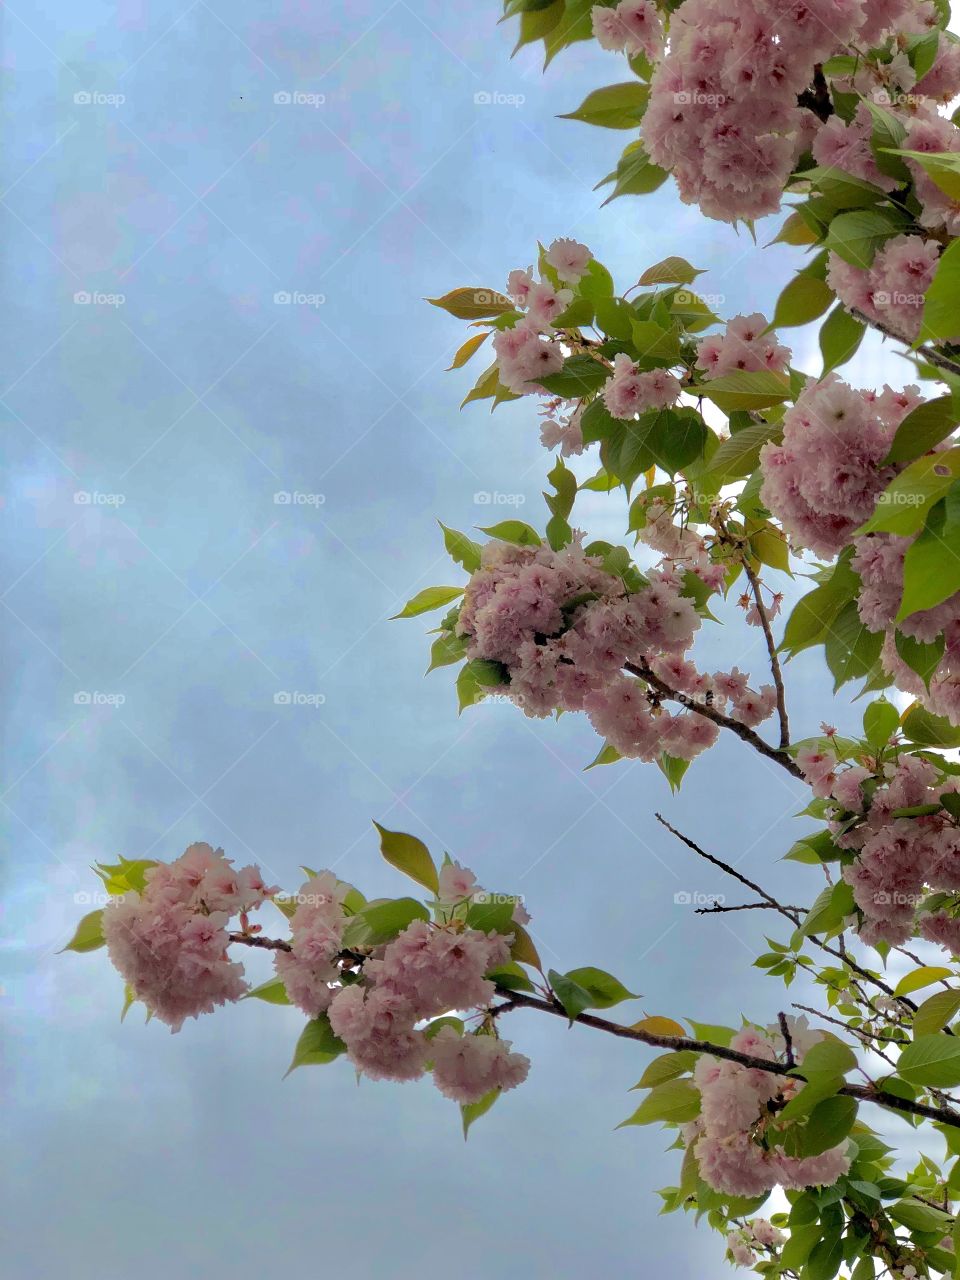 Blooming Beauty Bush with pink blossoms and green leaves on its branches, set against a pale blue sky background with clouds. Early summer.